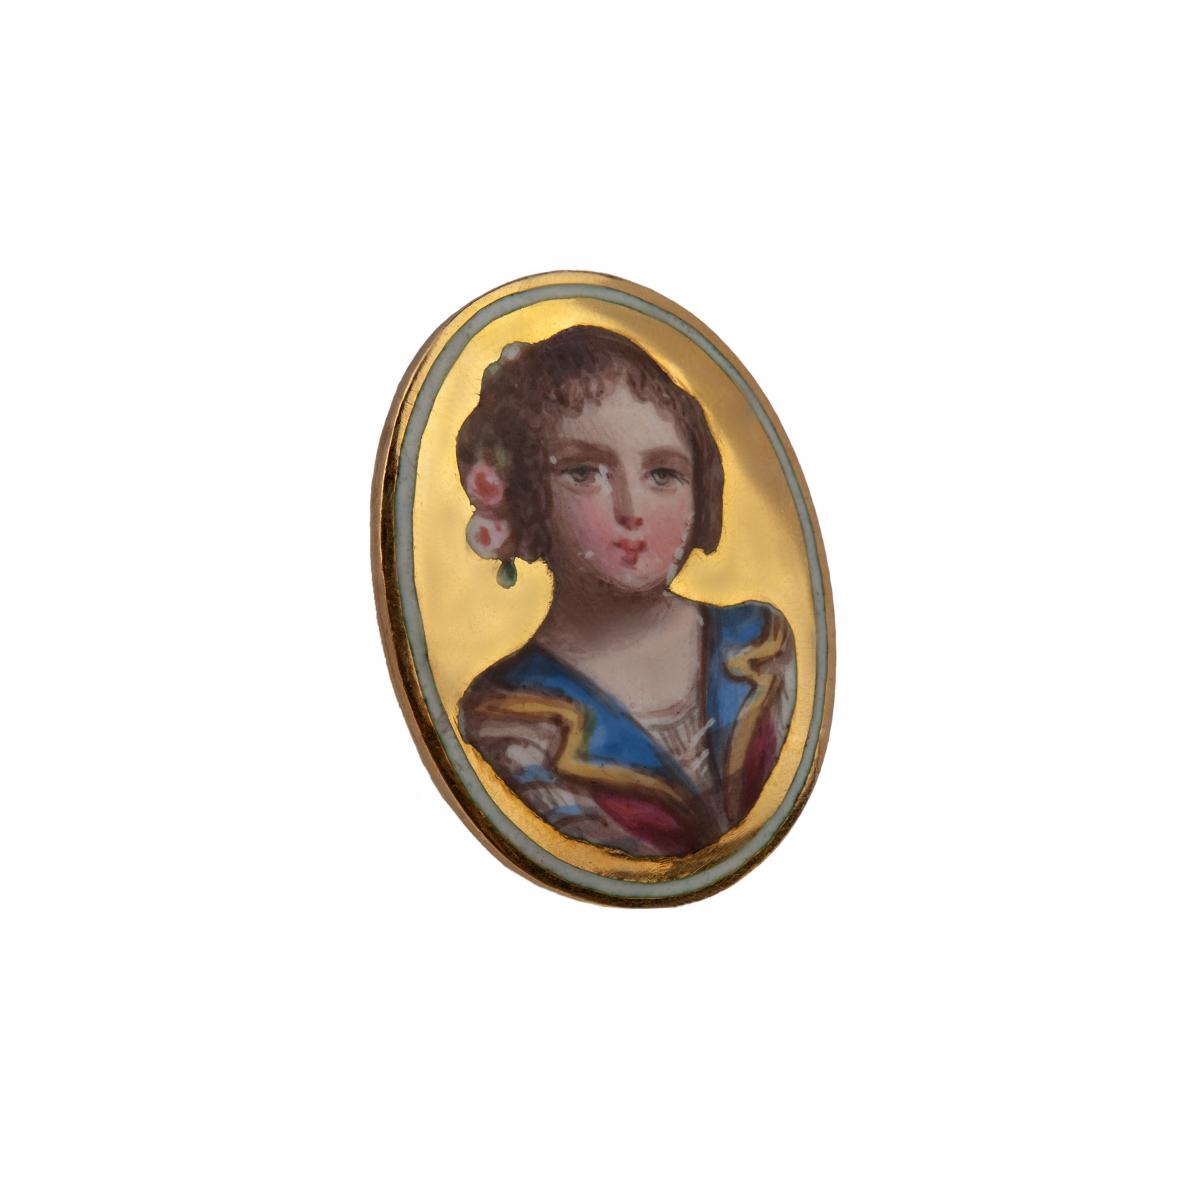 Antique Cufflinks in 18 Karat Gold with Portraits of Ladies in Enamel, French circa 1900.